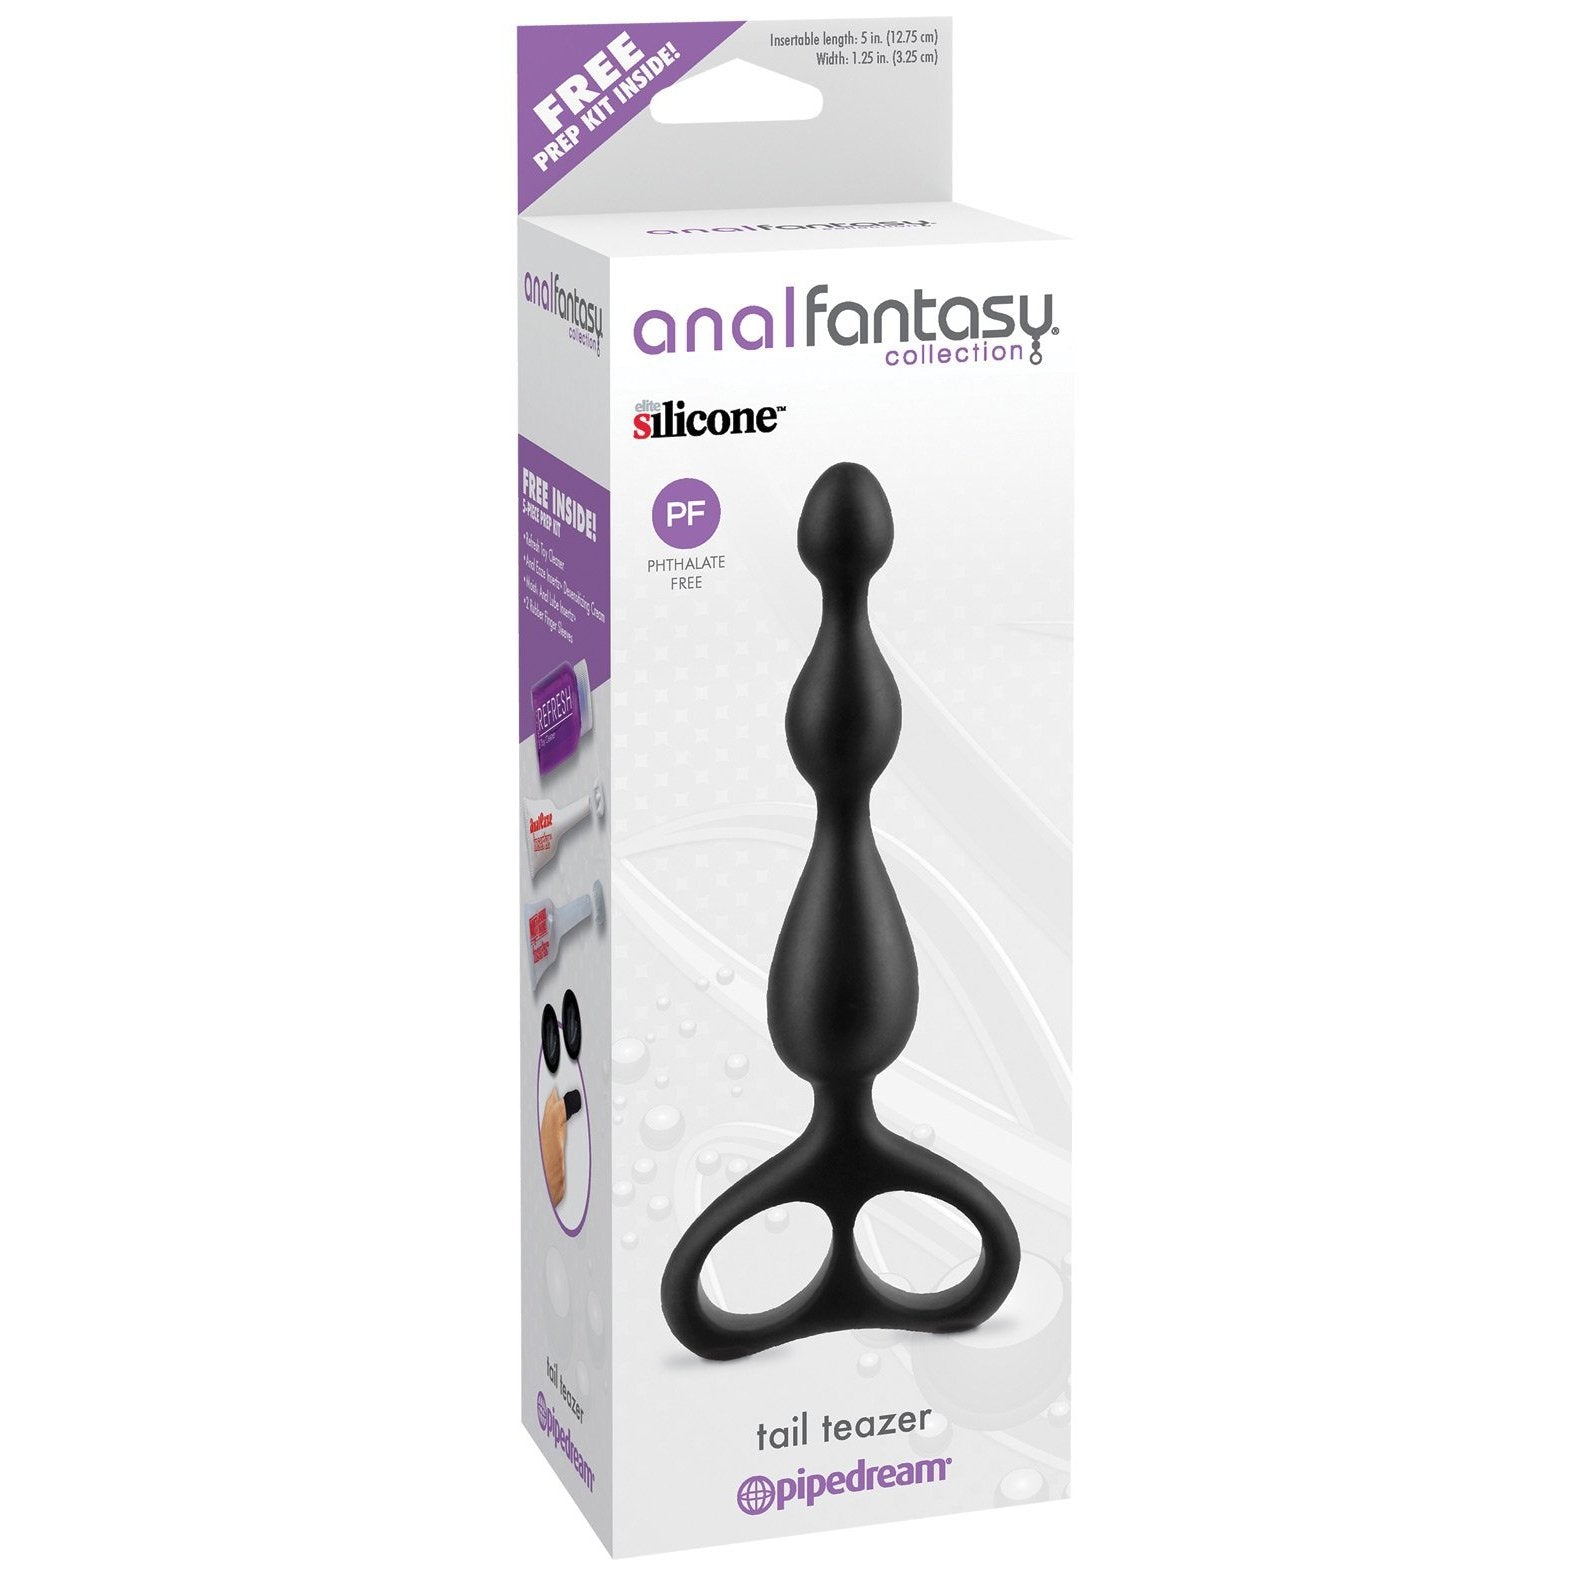 Anal Fantasy Collection Tail Teazer - Includes FREE 5-Piece Prep Kit